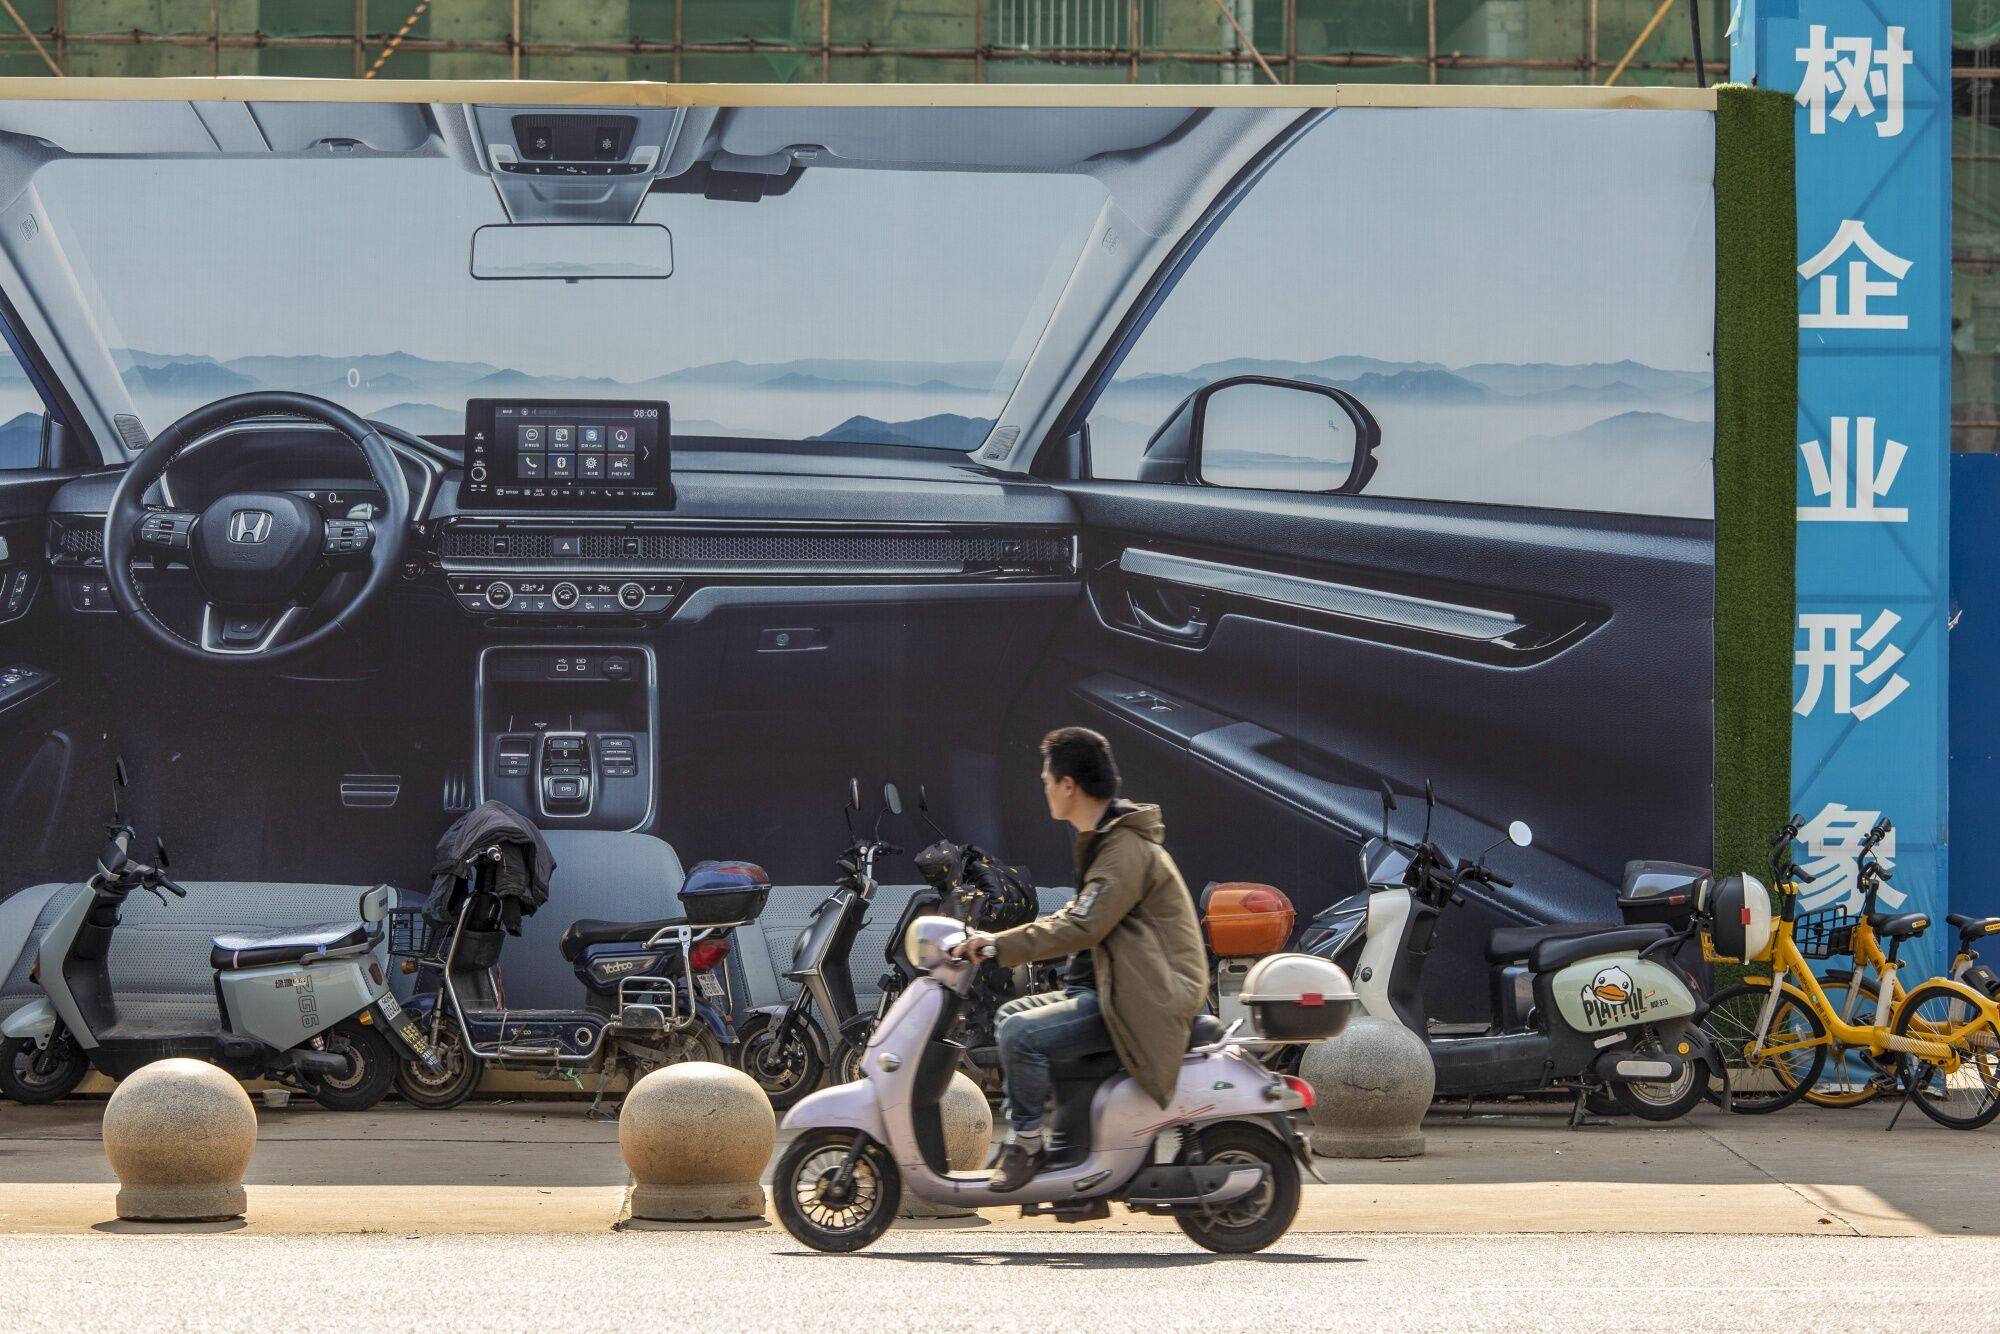 A motorcyclist passes an advertisement for electric vehicle in Wuhan, China, on October 24. Photo: Bloomberg